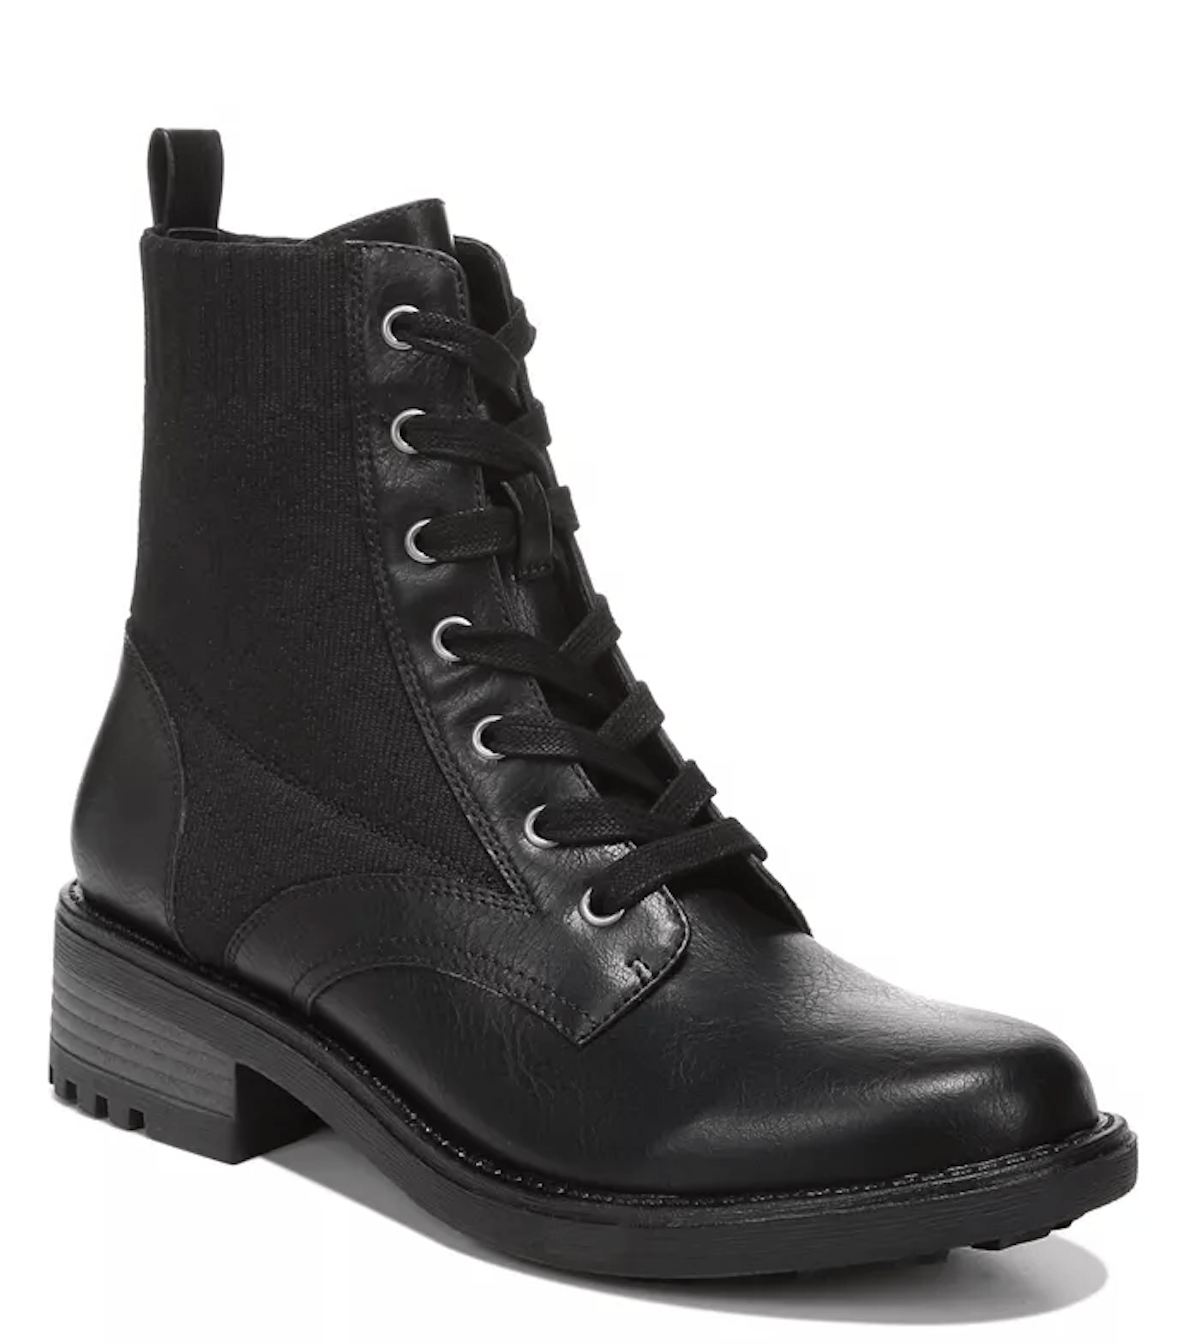 Combat boot for fall